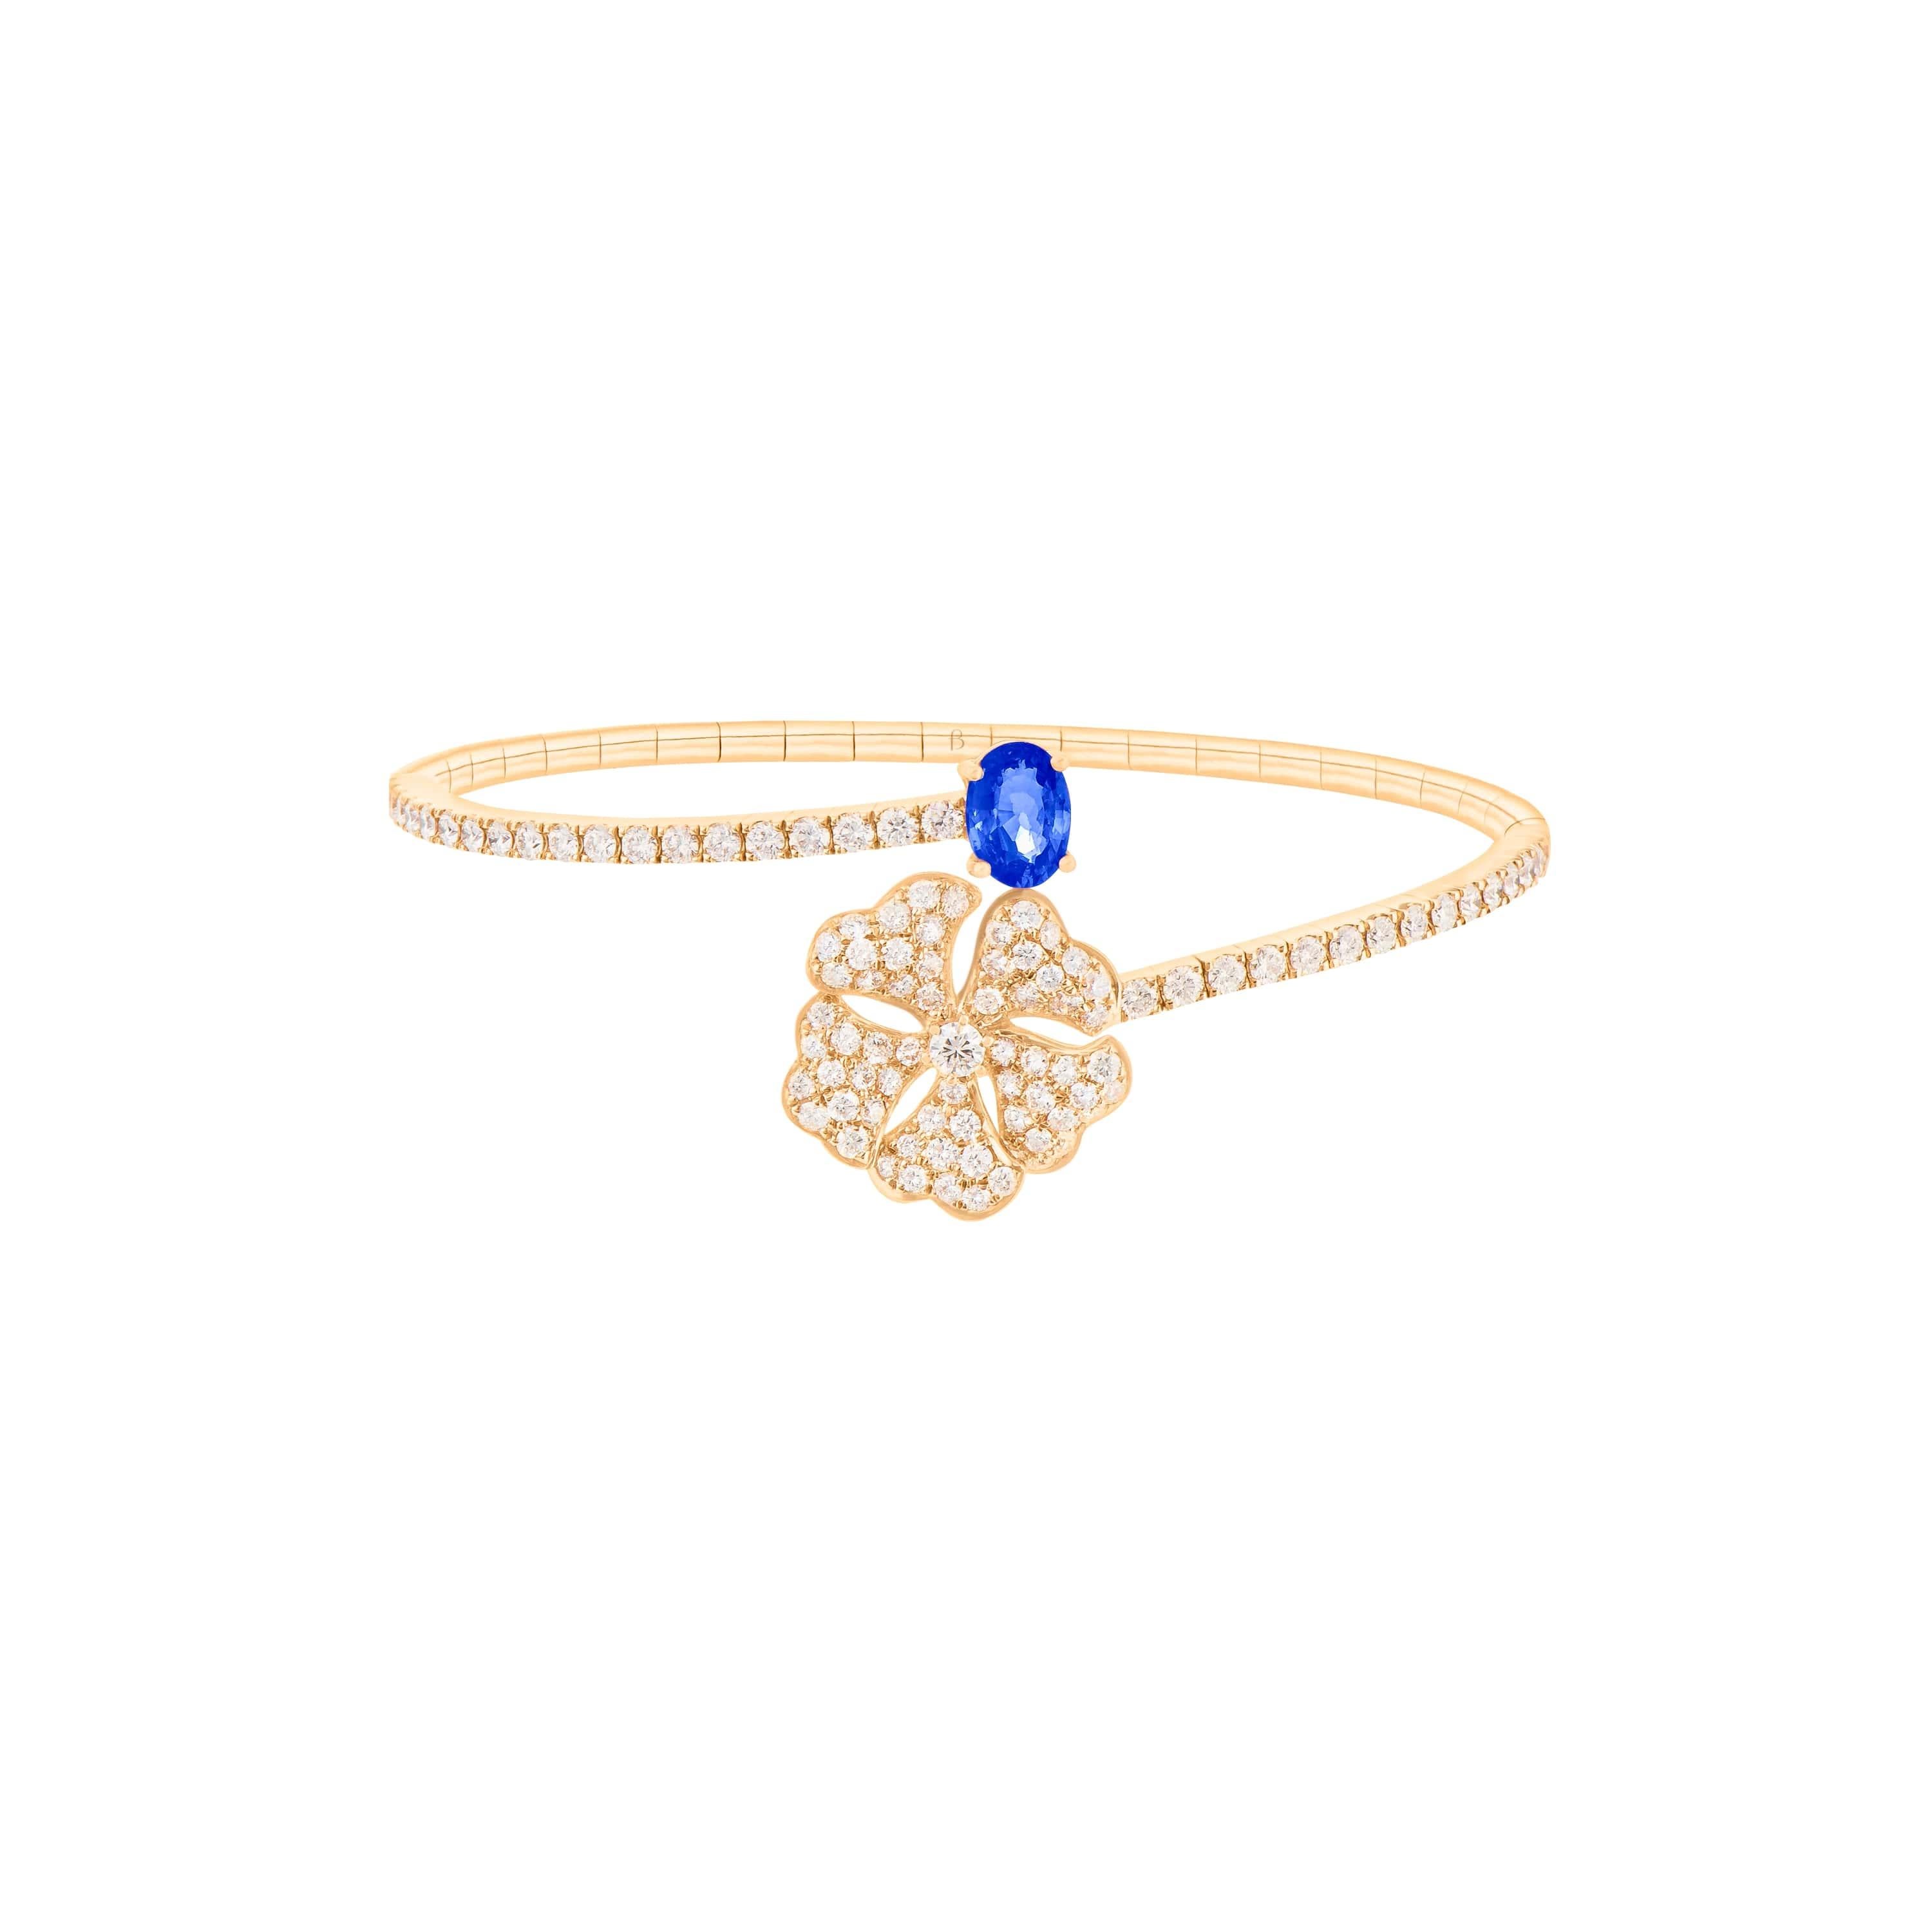 Bloom Blue Sapphire and Diamond Open Spiral Bangle in 18K Yellow Gold

Inspired by the exquisite petals of the alpine cinquefoil flower, the Bloom collection combines the richness of diamonds and precious metals with the light versatility of this